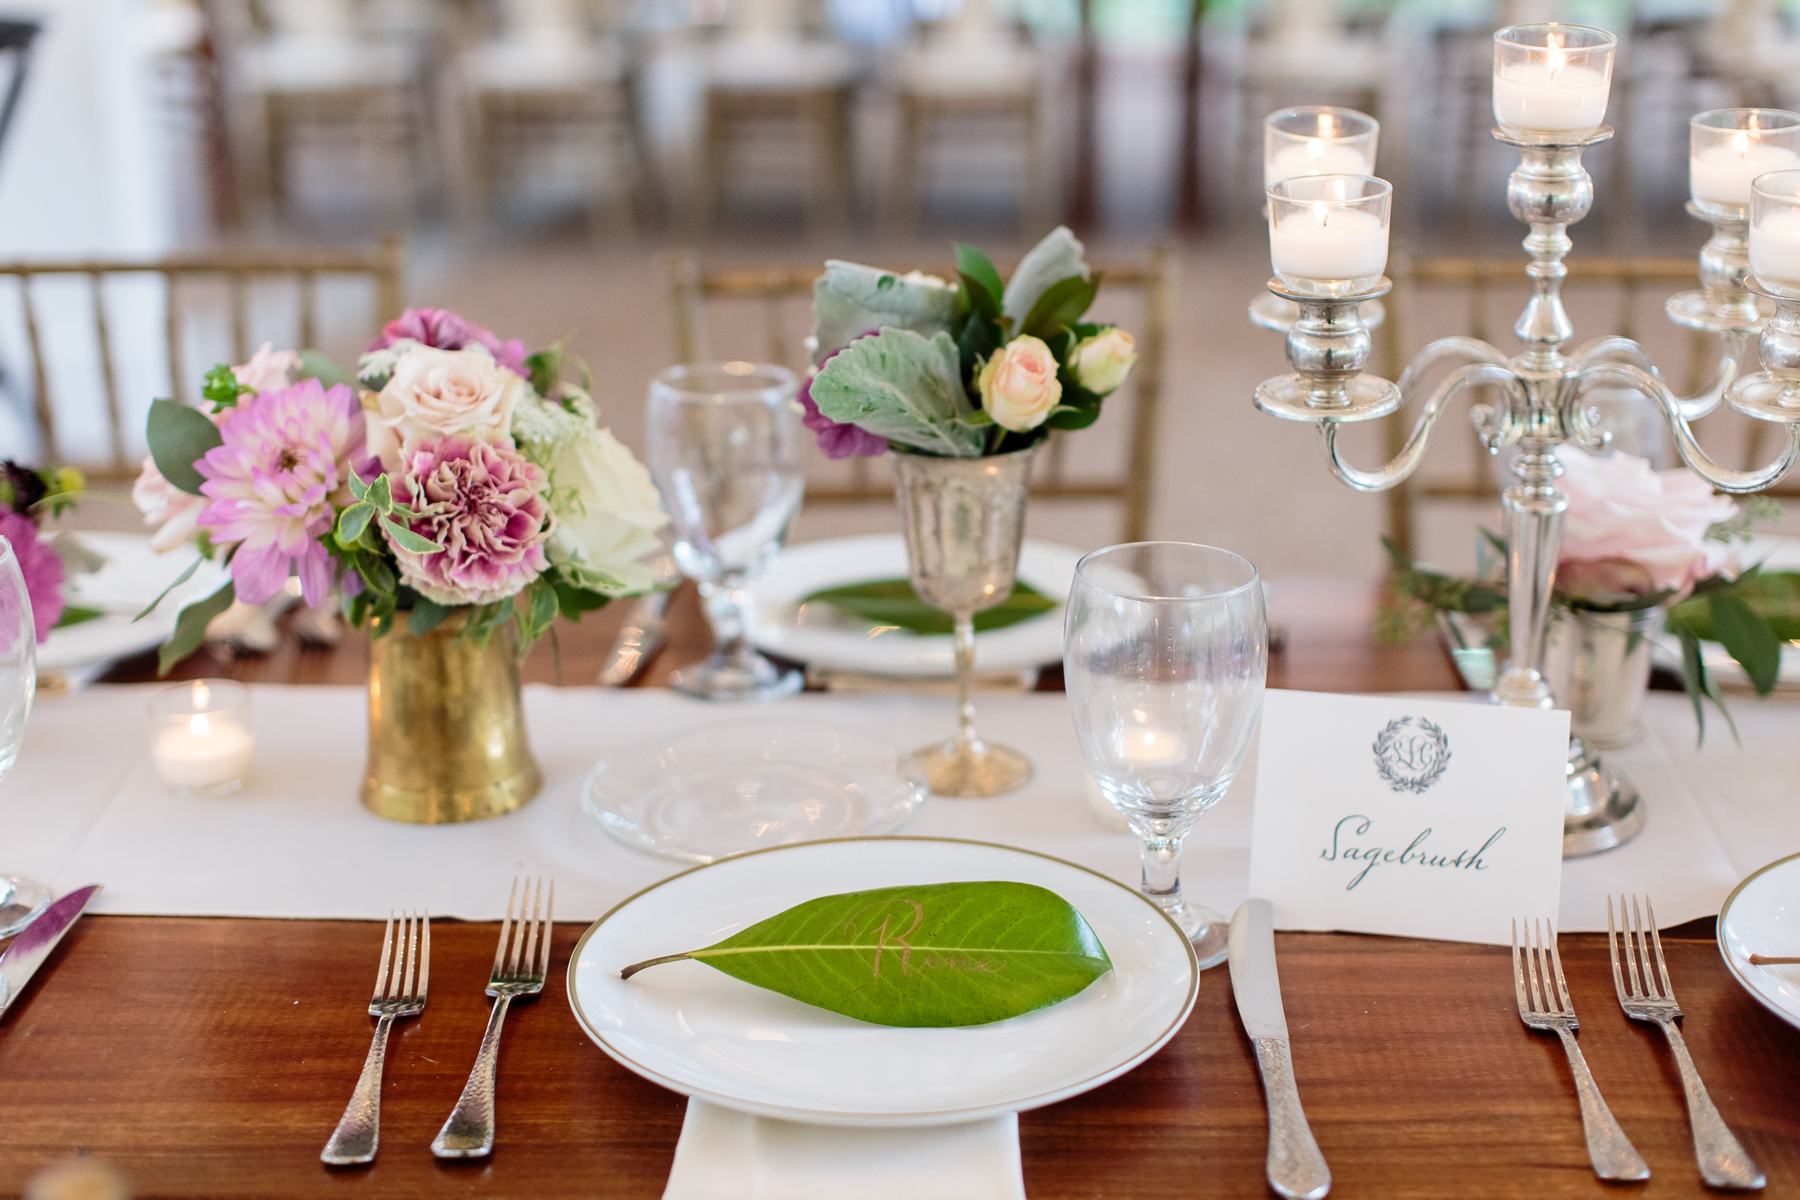 Place Cards on Leaves